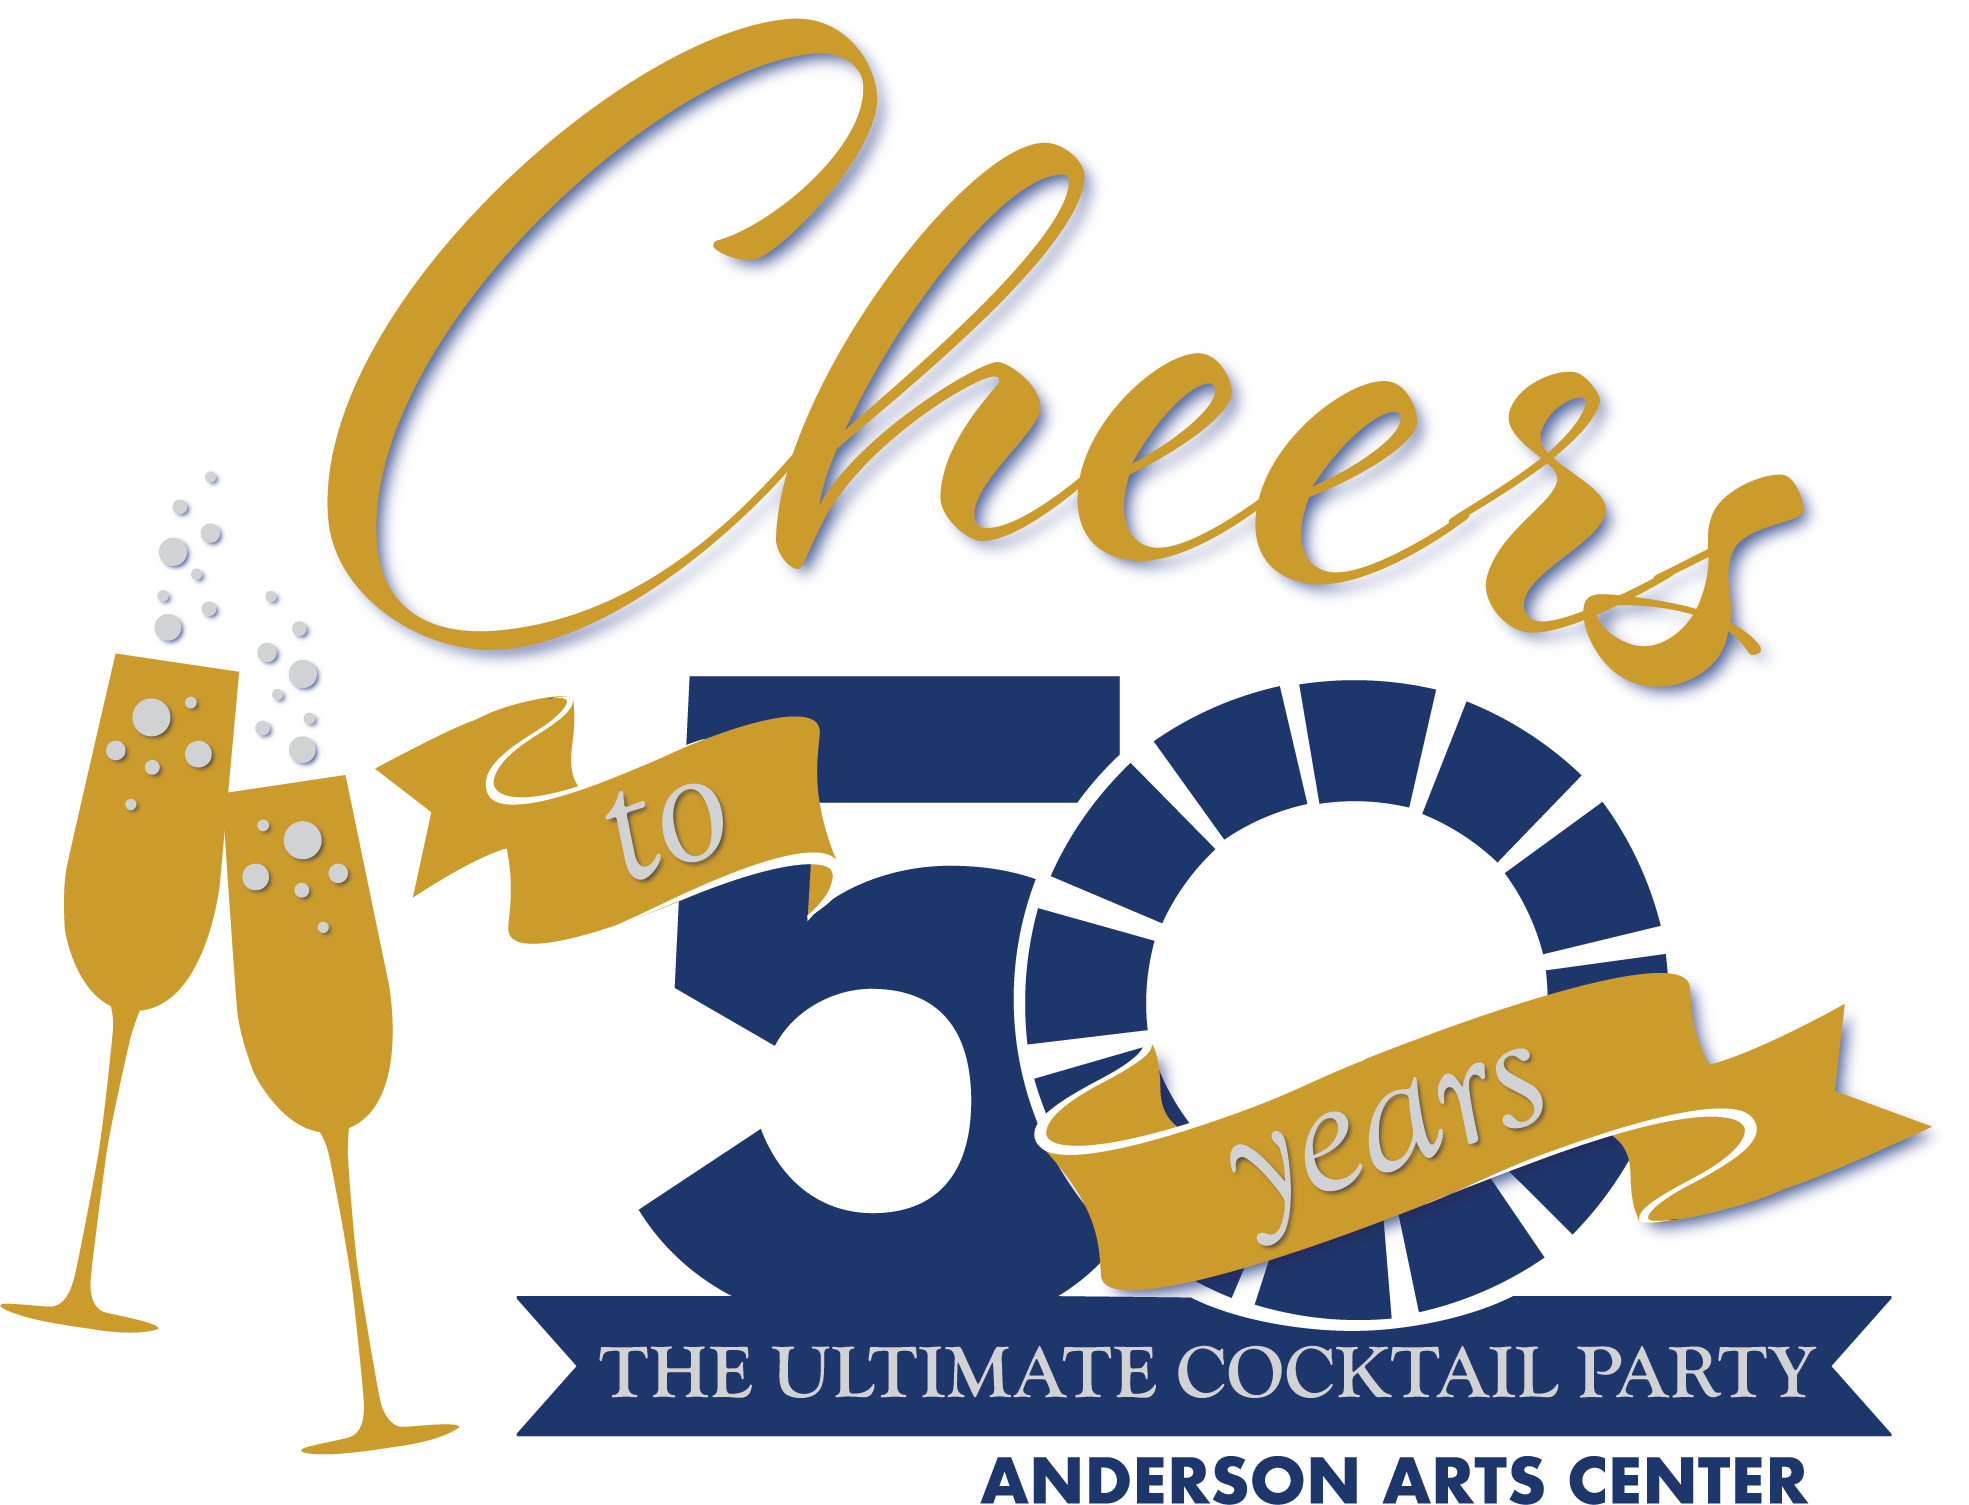 Cheers to 50 Years! The Ultimate Cocktail Party